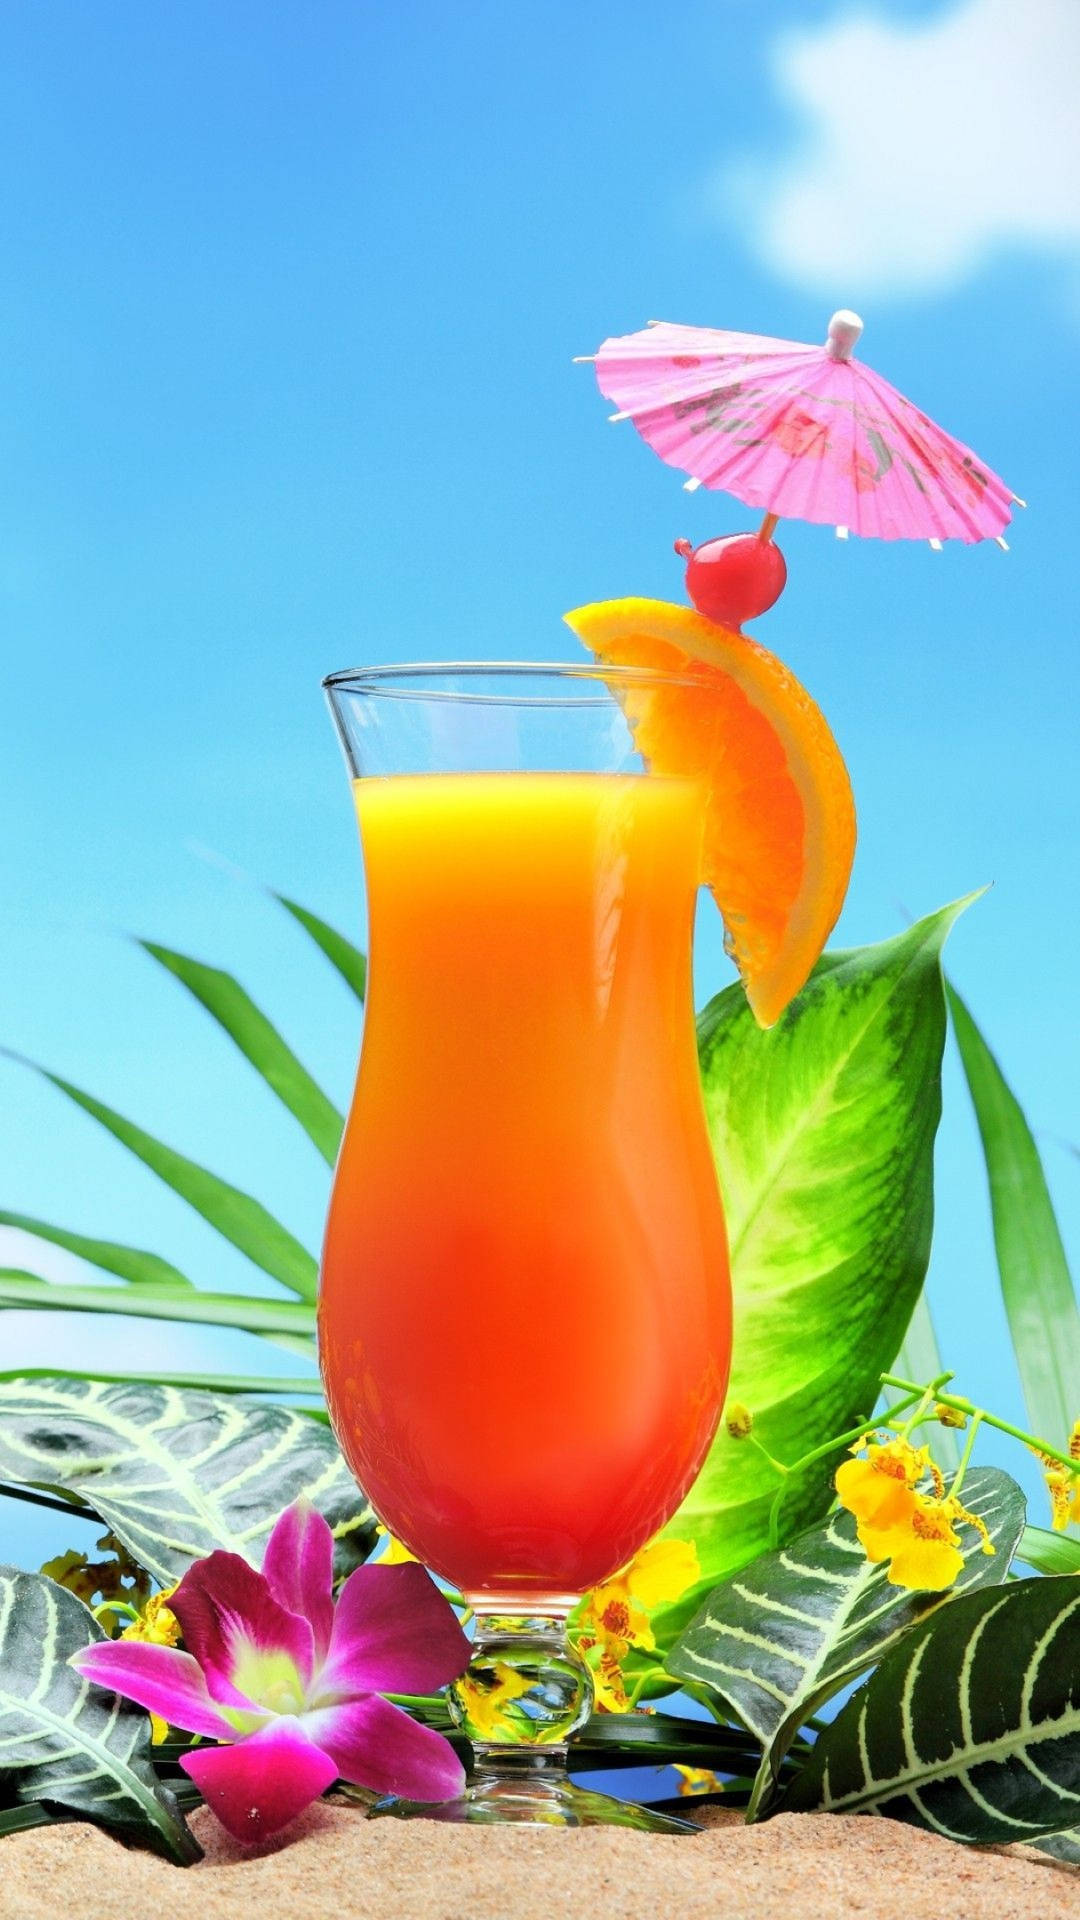 Tequila Sunrise Tropical Drink Wallpaper